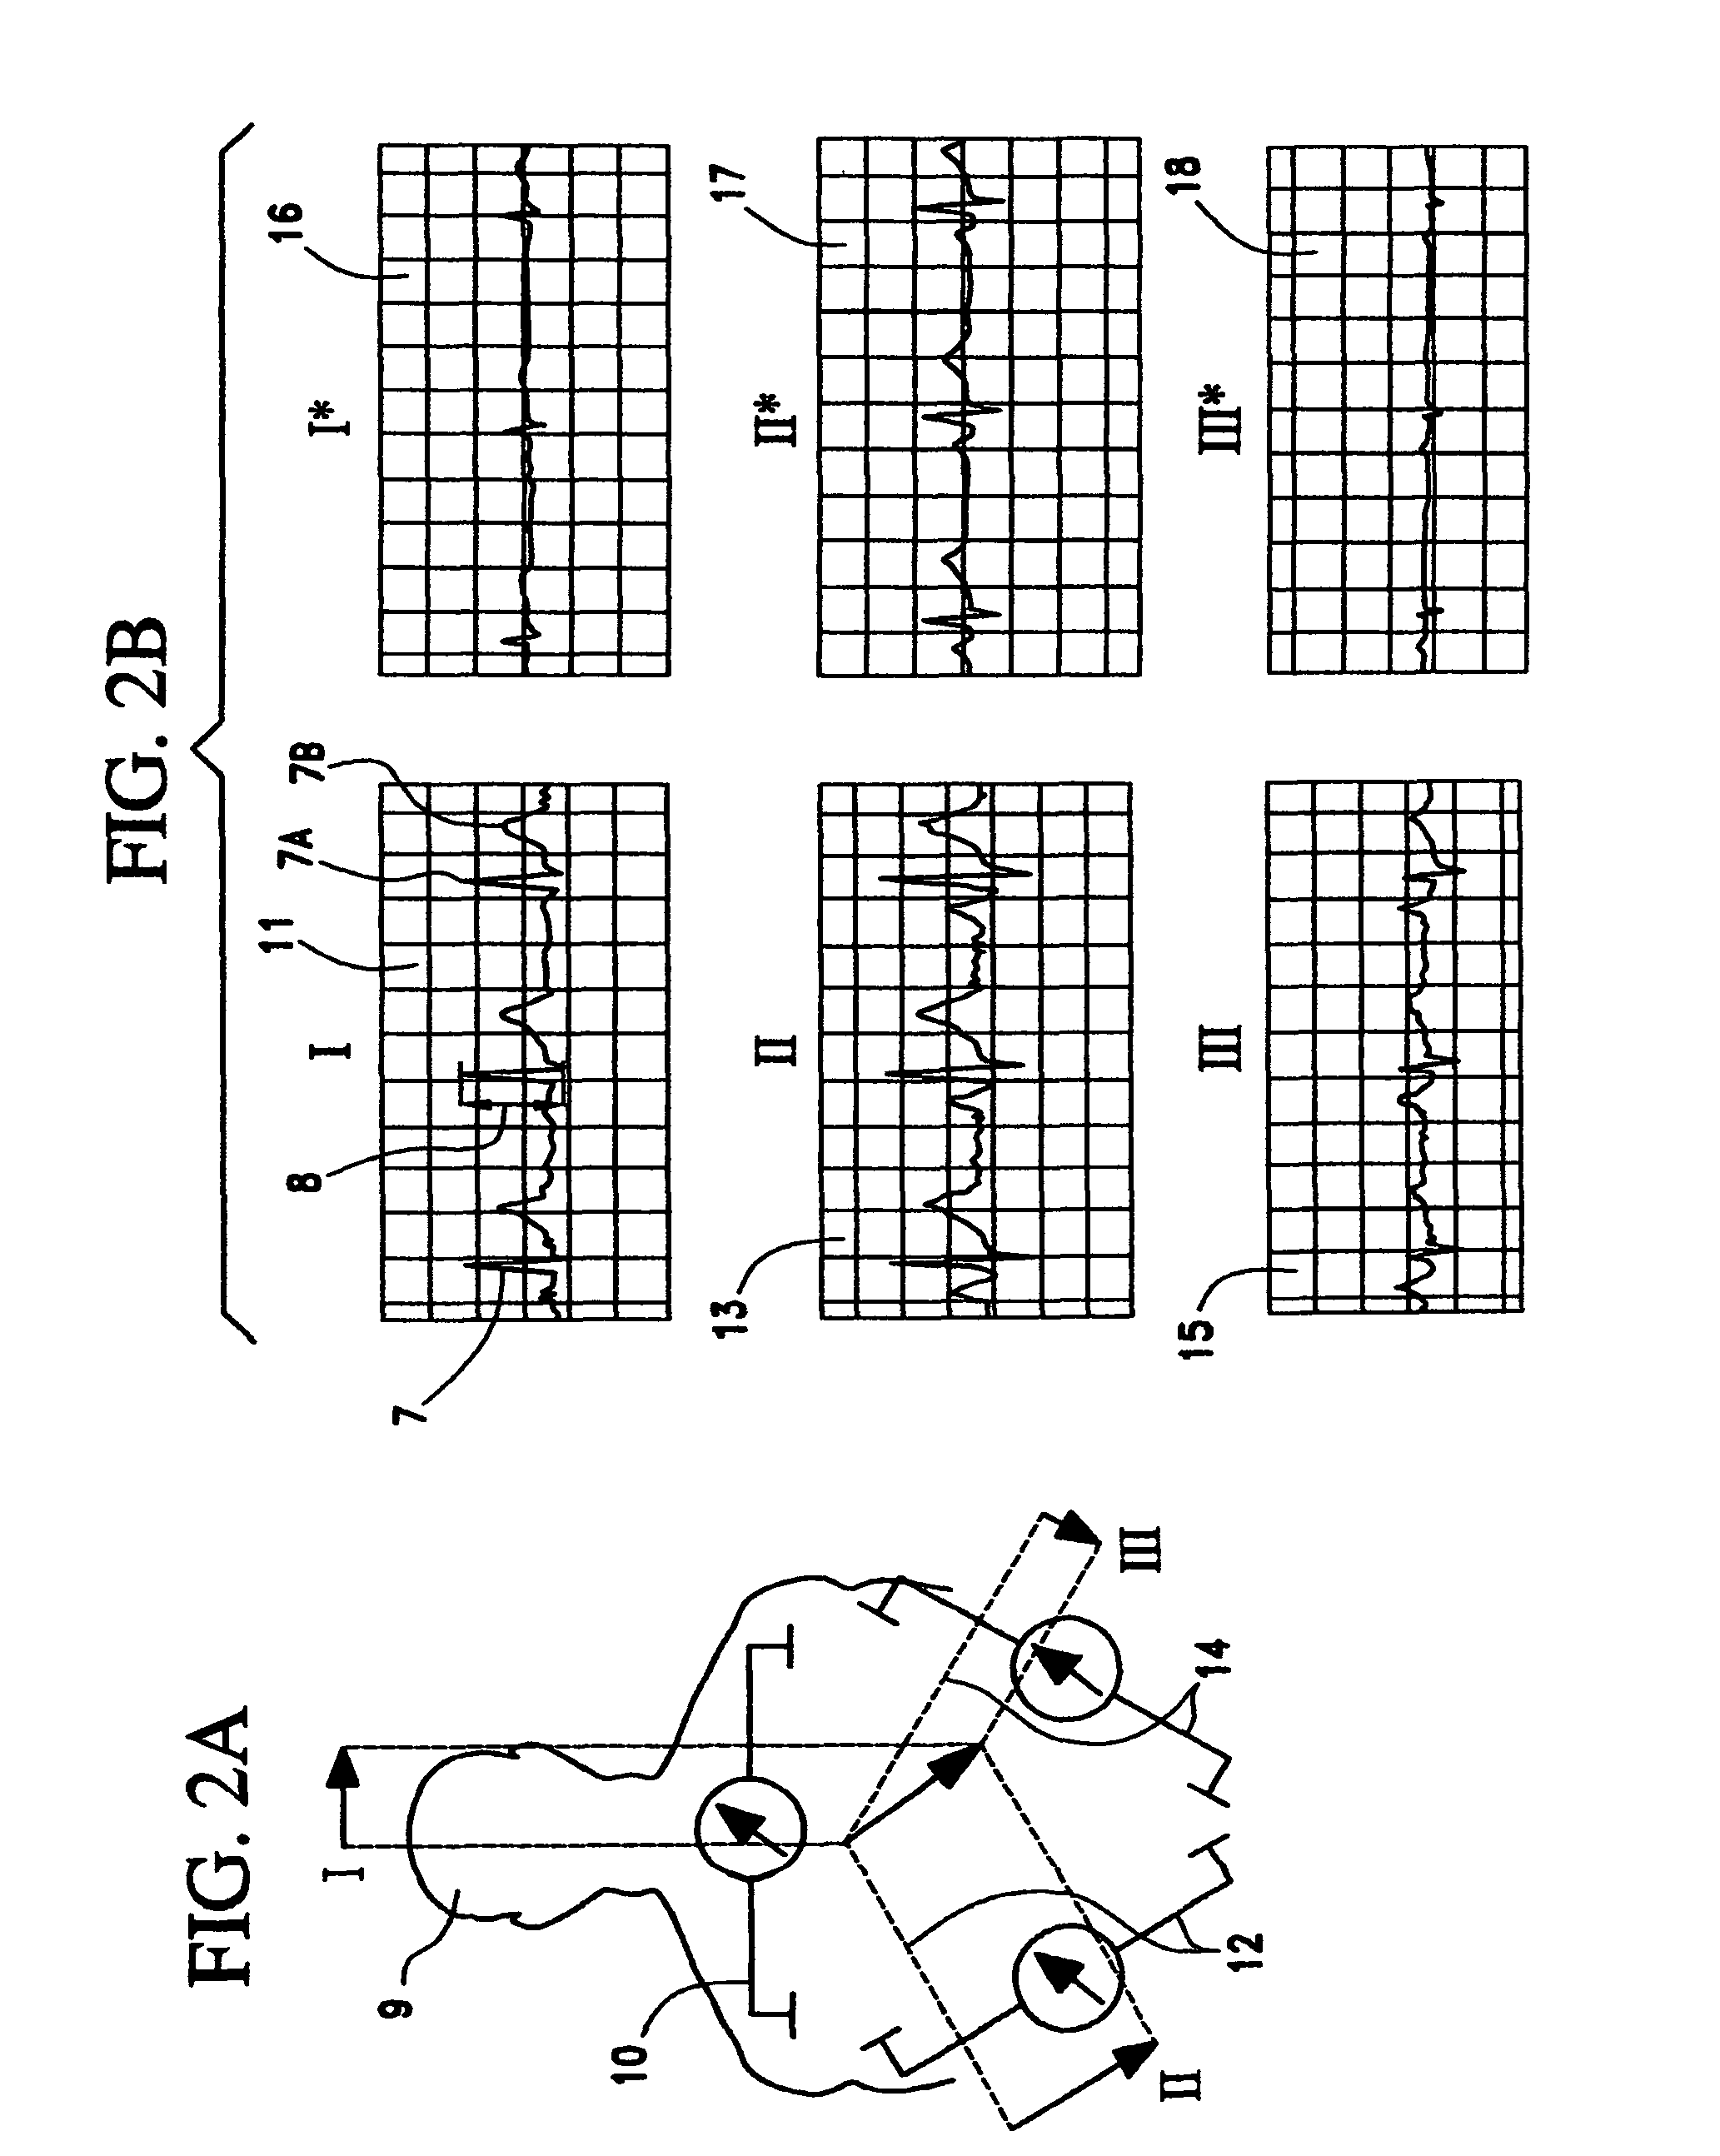 Method of vagal stimulation to treat patients suffering from congestive heart failure